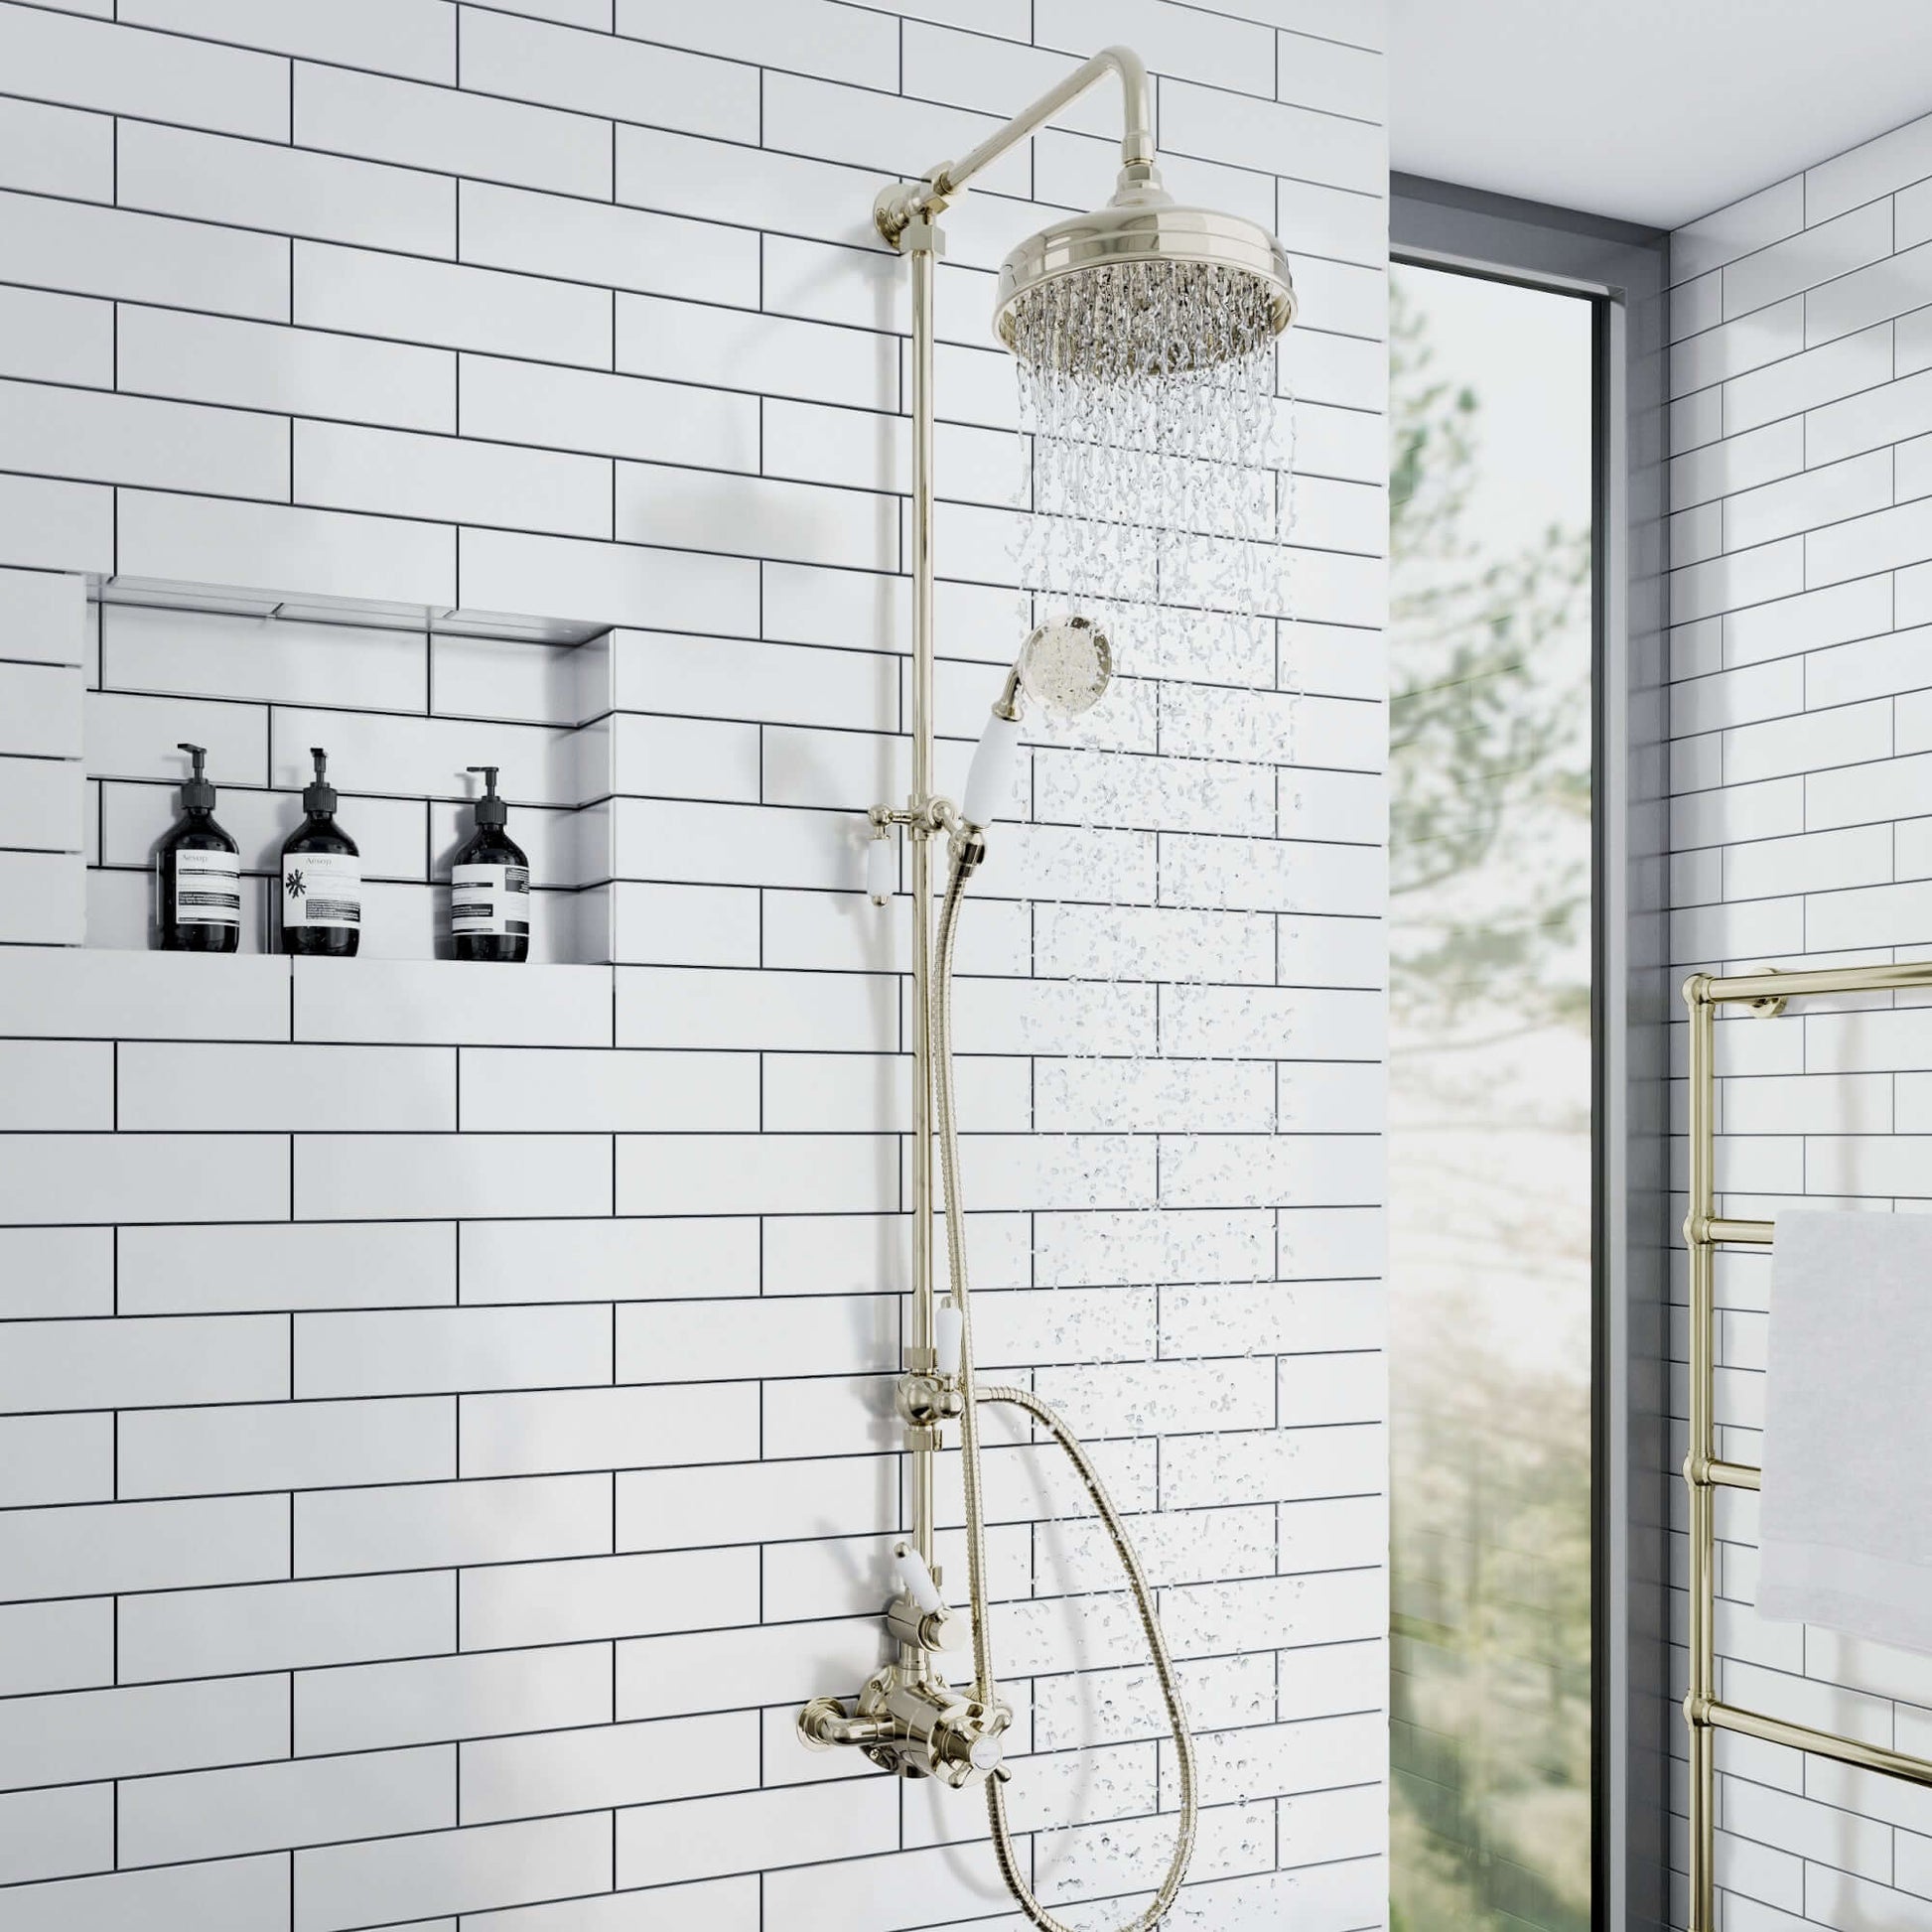 Downton traditional shower riser rail kit 2 outlet watercan head 200mm - English gold - Showers